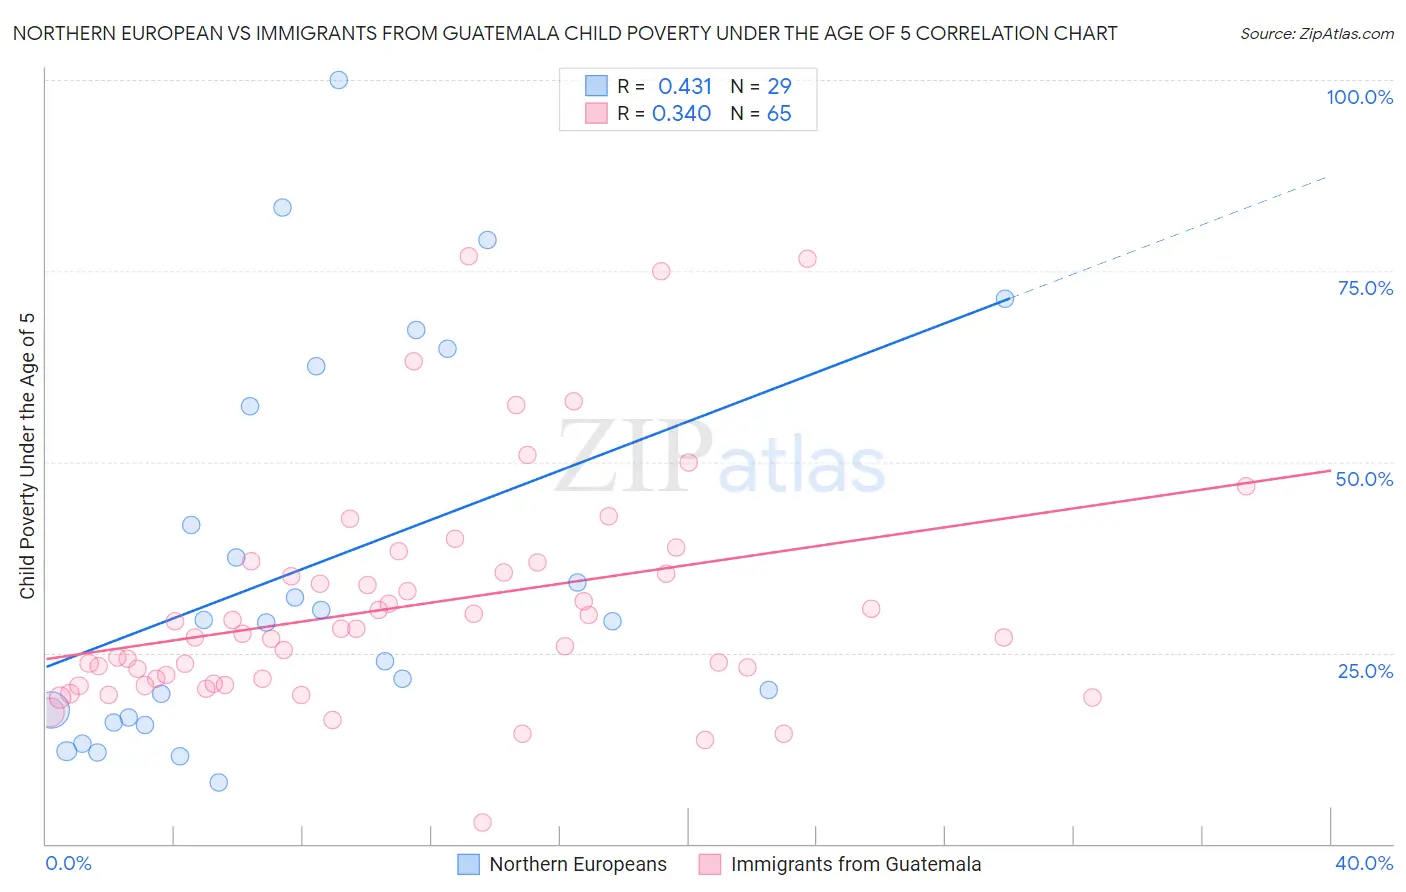 Northern European vs Immigrants from Guatemala Child Poverty Under the Age of 5